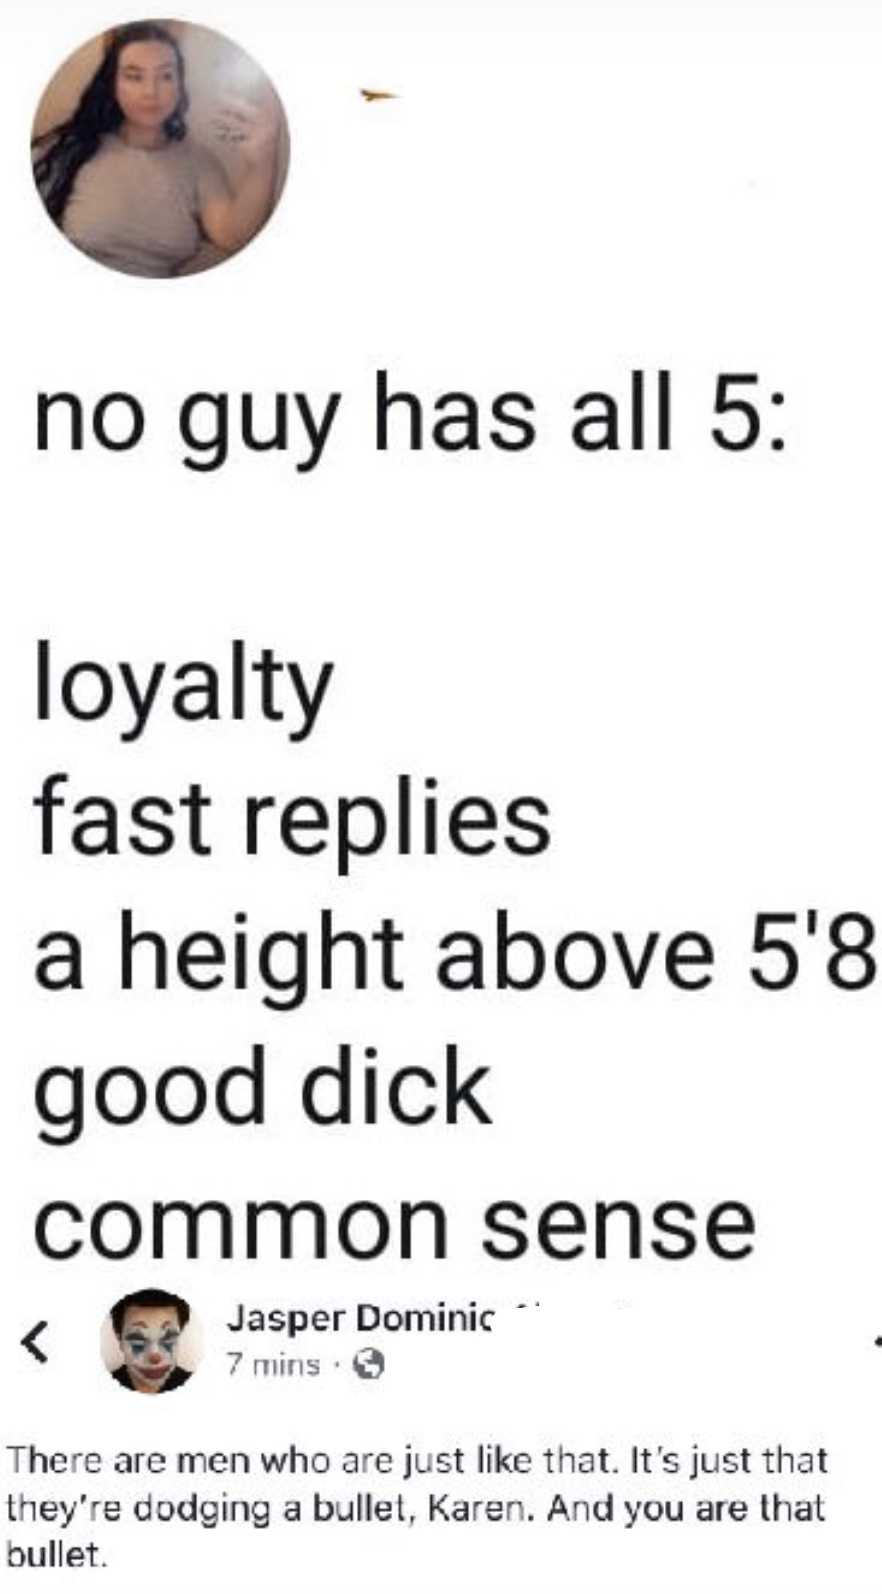 animal - no guy has all 5 loyalty fast replies a height above 5'8 good dick common sense Jasper Dominic 7 mins. There are men who are just that. It's just that they're dodging a bullet, Karen. And you are that bullet.